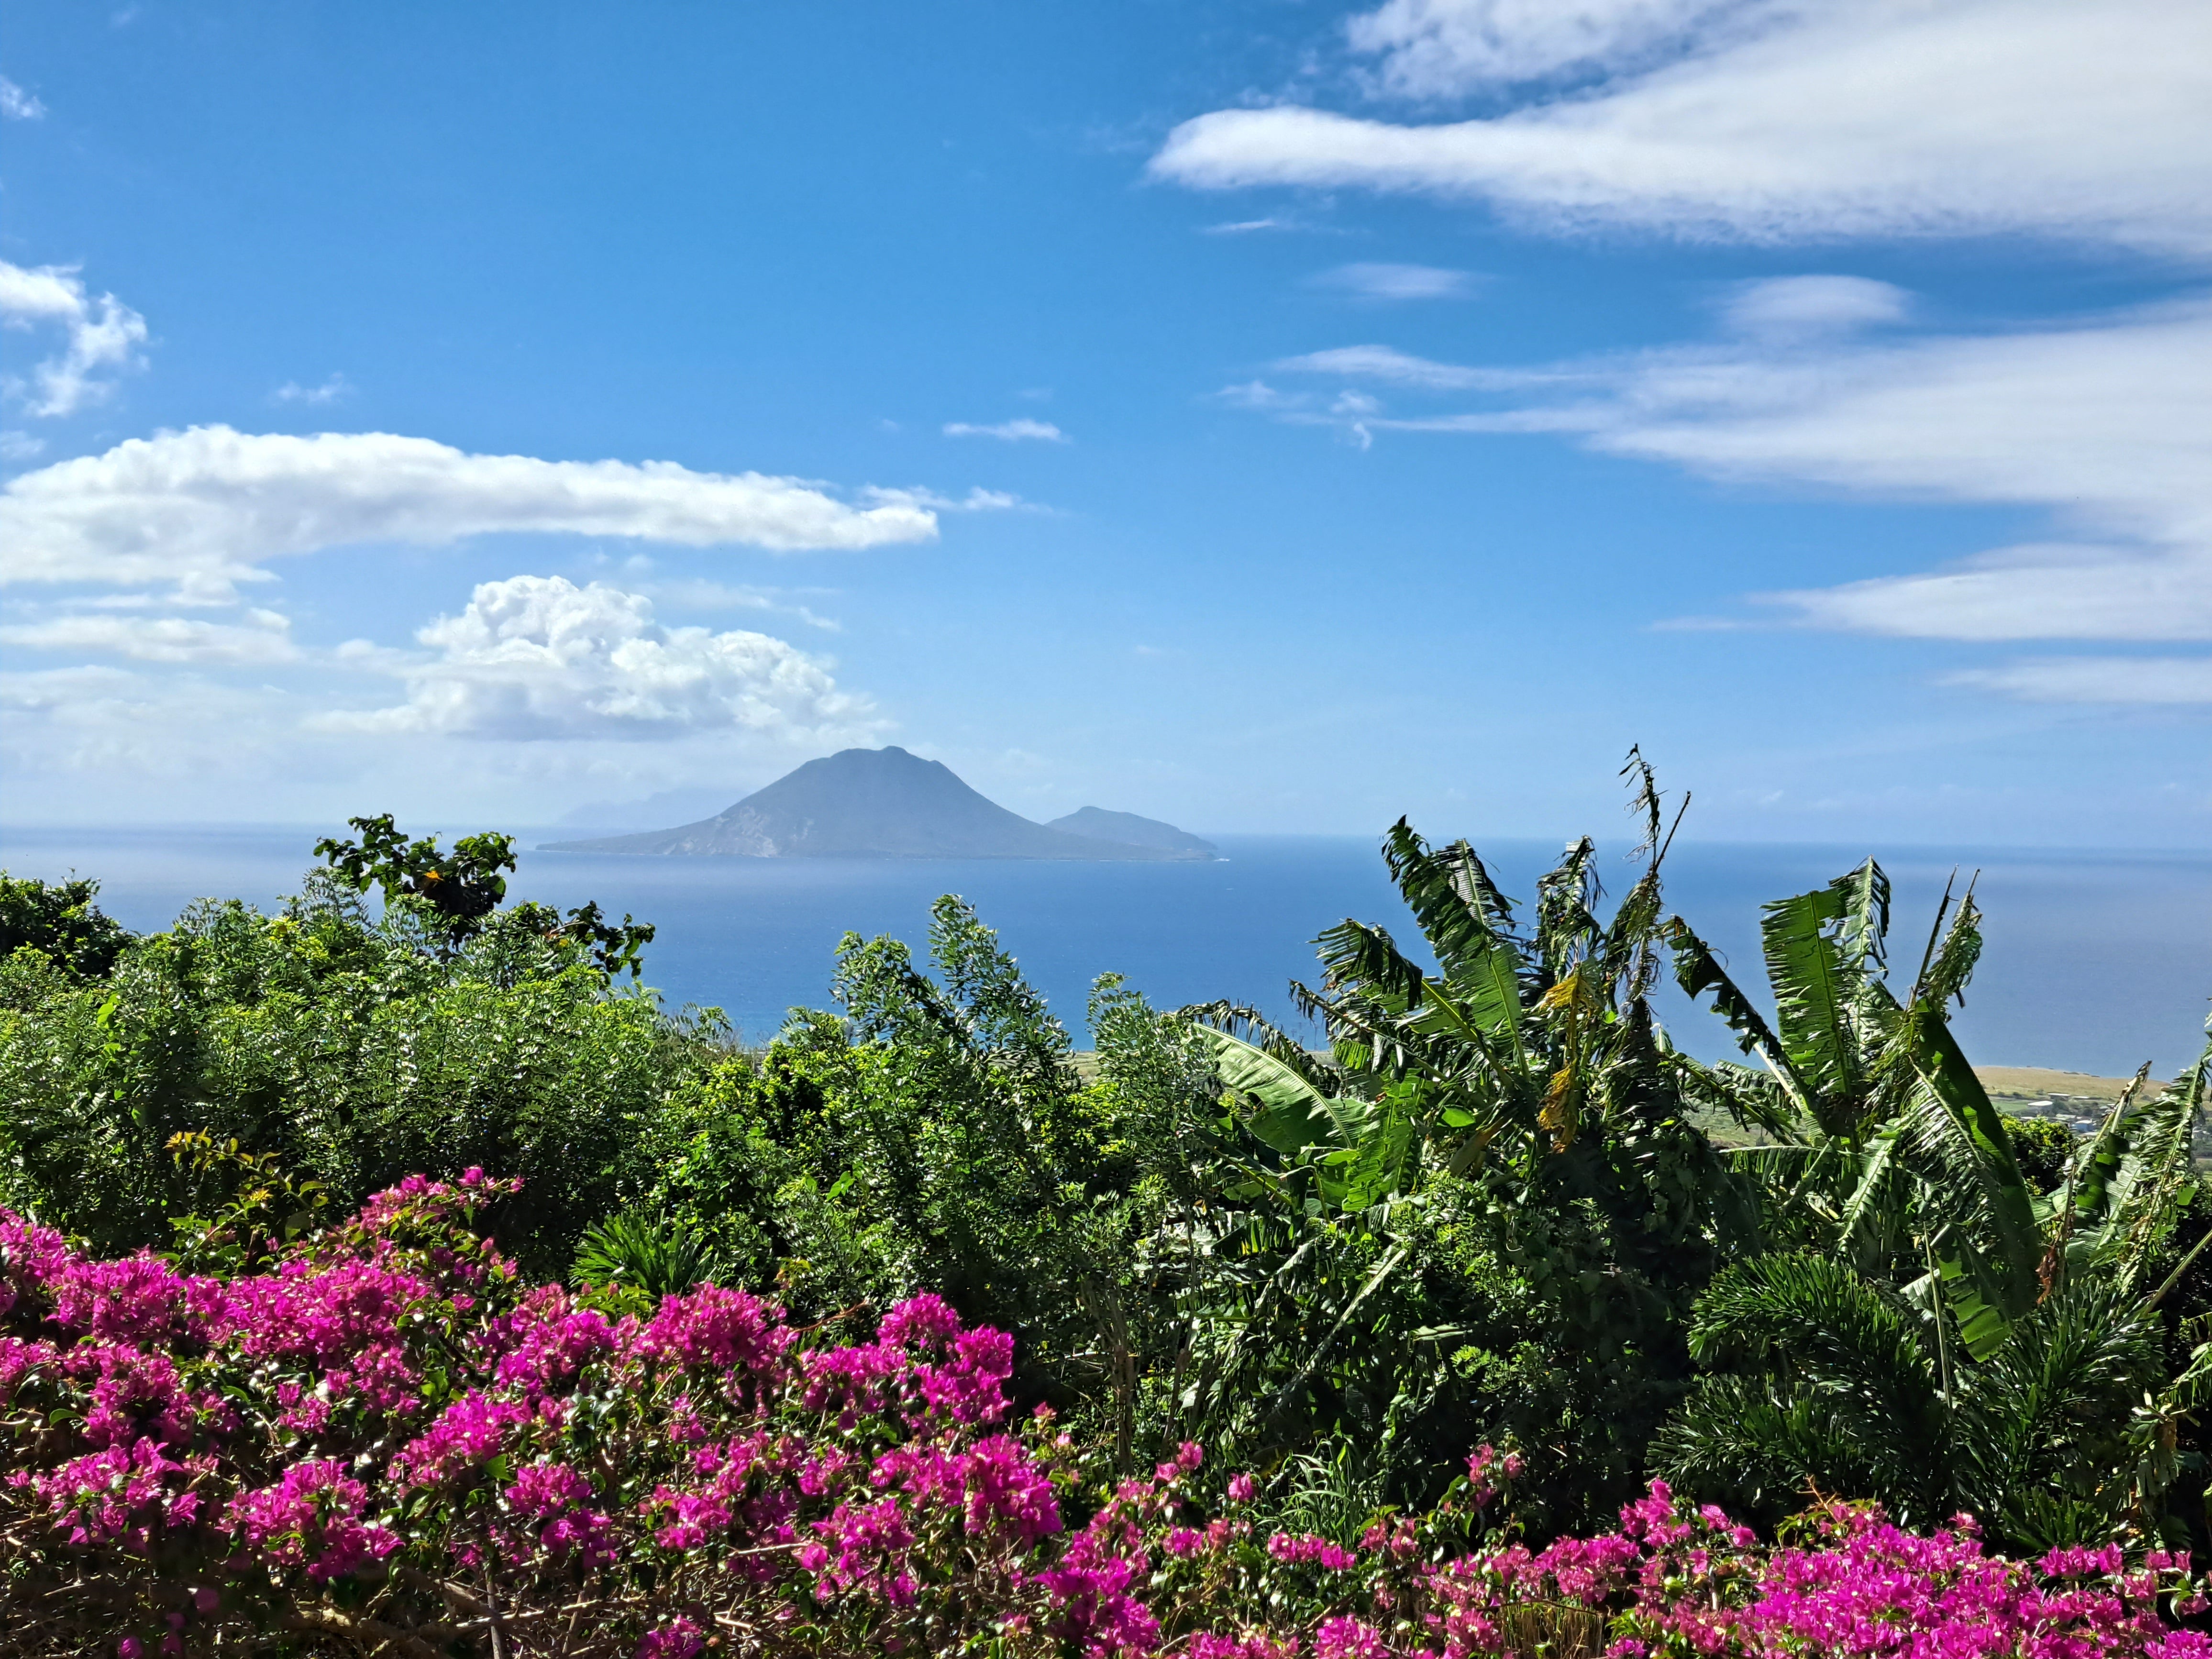 The island of Sint Eustatius, as seen from nearby St Kitts